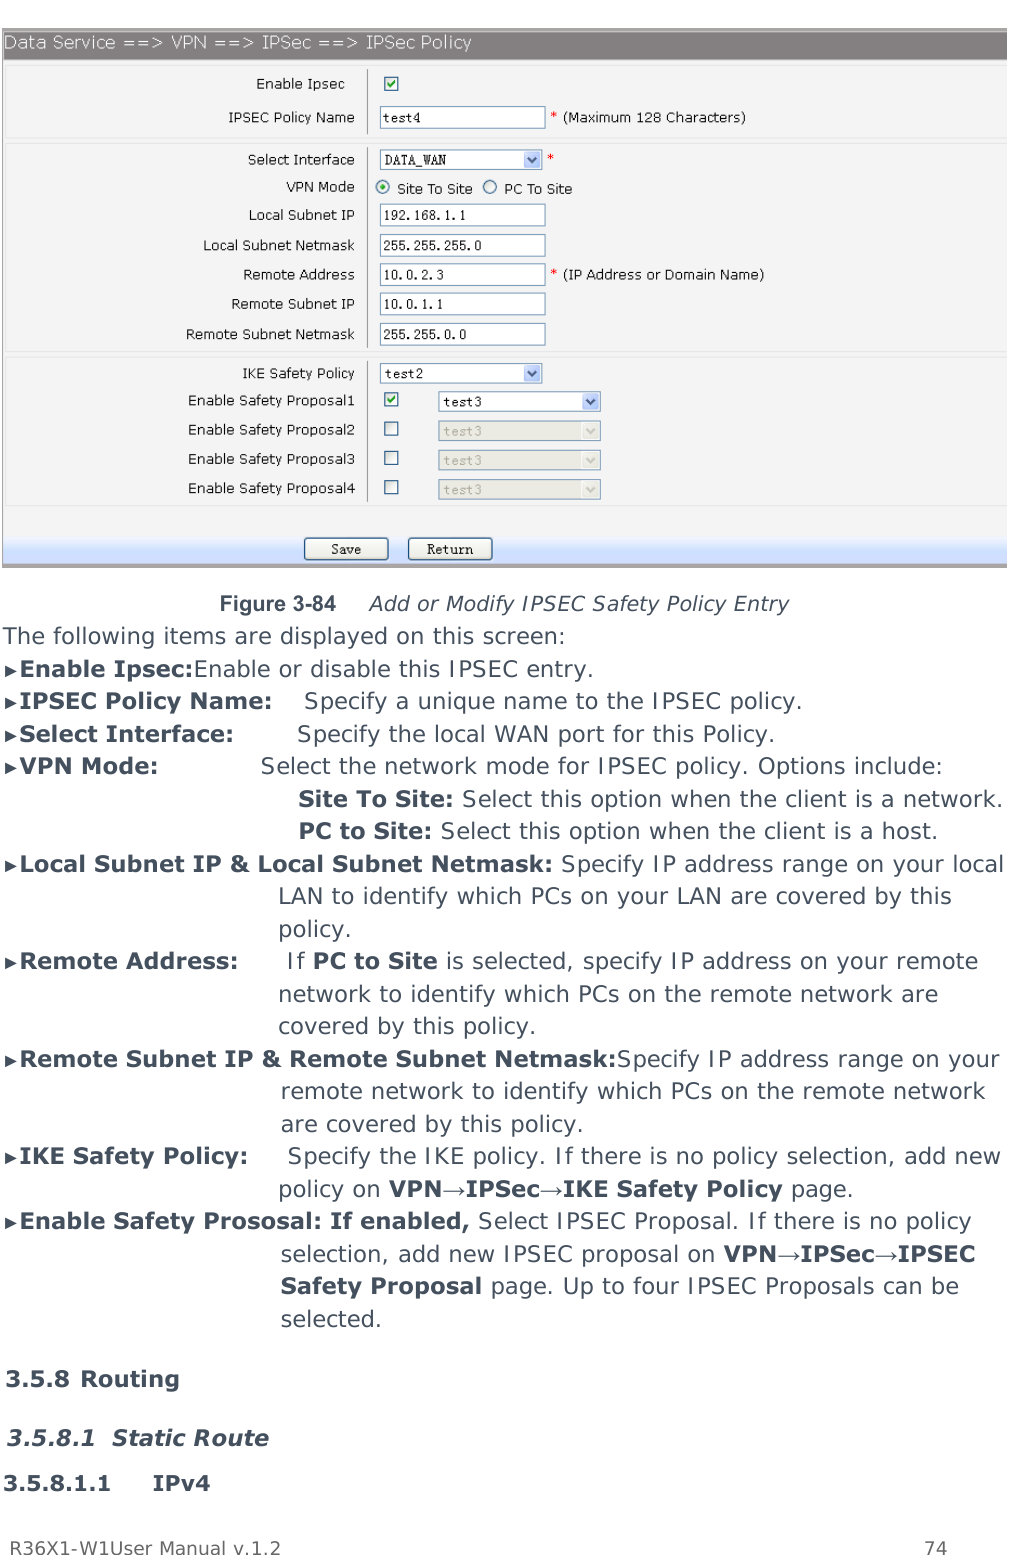           R36X1-W1User Manual v.1.2    74   Figure 3-84  Add or Modify IPSEC Safety Policy Entry The following items are displayed on this screen: ►Enable Ipsec:Enable or disable this IPSEC entry. ►IPSEC Policy Name:    Specify a unique name to the IPSEC policy. ►Select Interface:        Specify the local WAN port for this Policy. ►VPN Mode:             Select the network mode for IPSEC policy. Options include: Site To Site: Select this option when the client is a network. PC to Site: Select this option when the client is a host. ►Local Subnet IP &amp; Local Subnet Netmask: Specify IP address range on your local LAN to identify which PCs on your LAN are covered by this policy. ►Remote Address:      If PC to Site is selected, specify IP address on your remote network to identify which PCs on the remote network are covered by this policy. ►Remote Subnet IP &amp; Remote Subnet Netmask:Specify IP address range on your remote network to identify which PCs on the remote network are covered by this policy. ►IKE Safety Policy:     Specify the IKE policy. If there is no policy selection, add new policy on VPN→IPSec→IKE Safety Policy page. ►Enable Safety Prososal: If enabled, Select IPSEC Proposal. If there is no policy selection, add new IPSEC proposal on VPN→IPSec→IPSEC Safety Proposal page. Up to four IPSEC Proposals can be selected. 3.5.8 Routing 3.5.8.1 Static Route 3.5.8.1.1 IPv4  